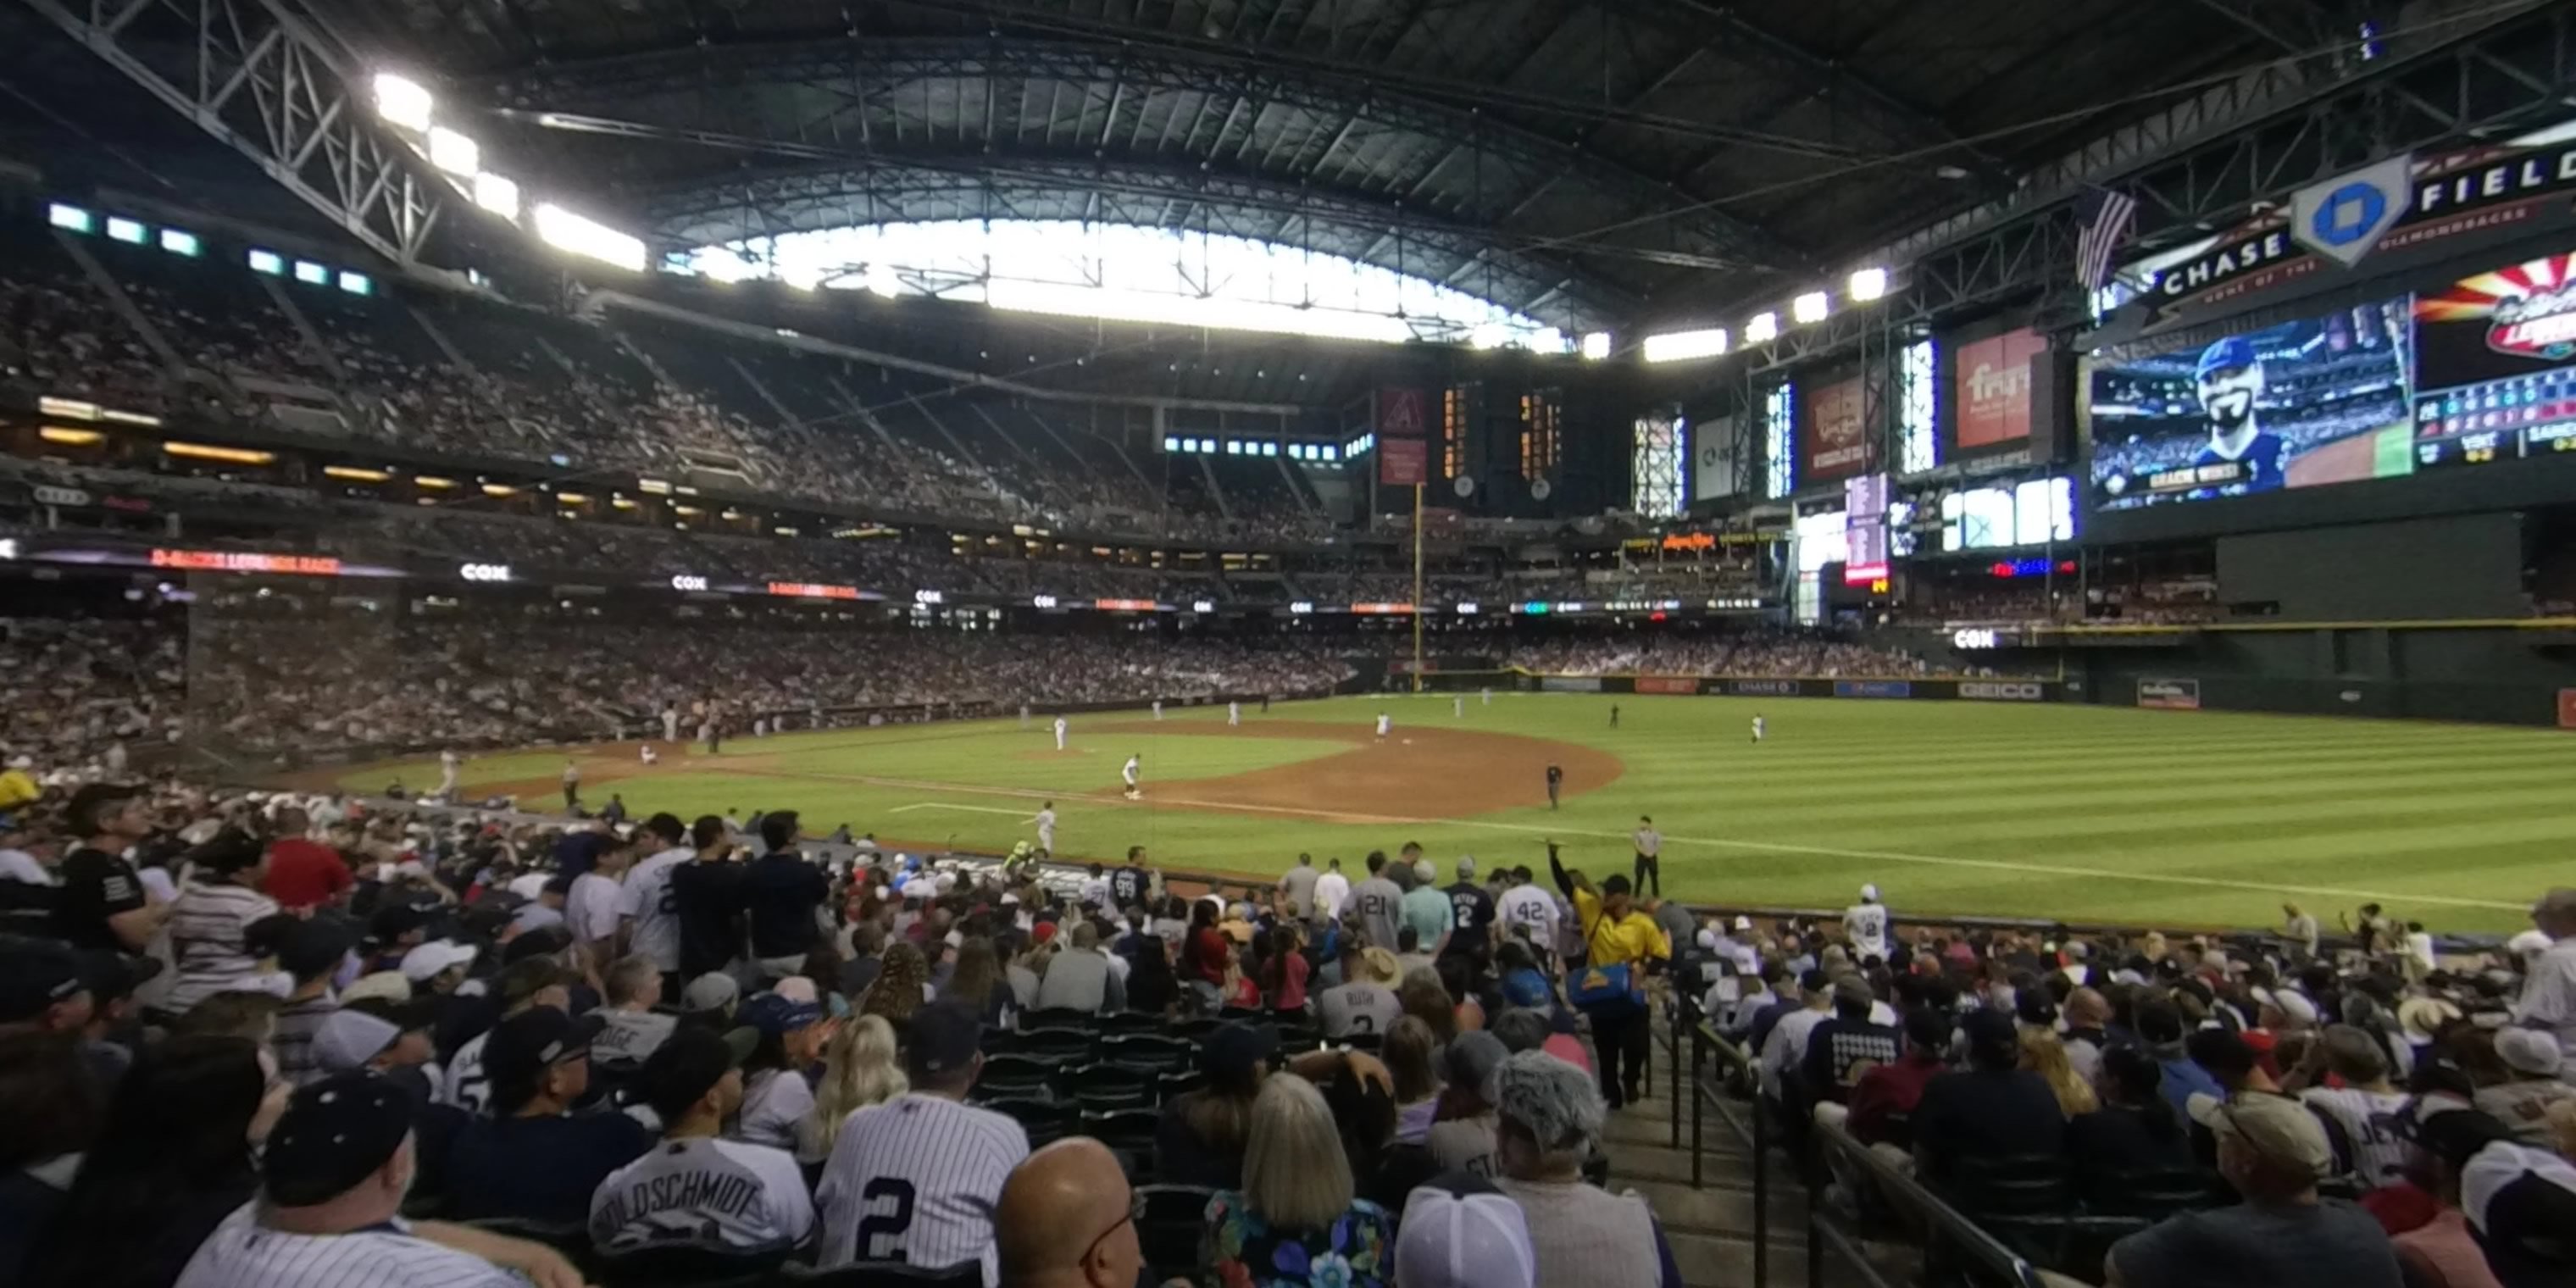 section 113 panoramic seat view  for baseball - chase field